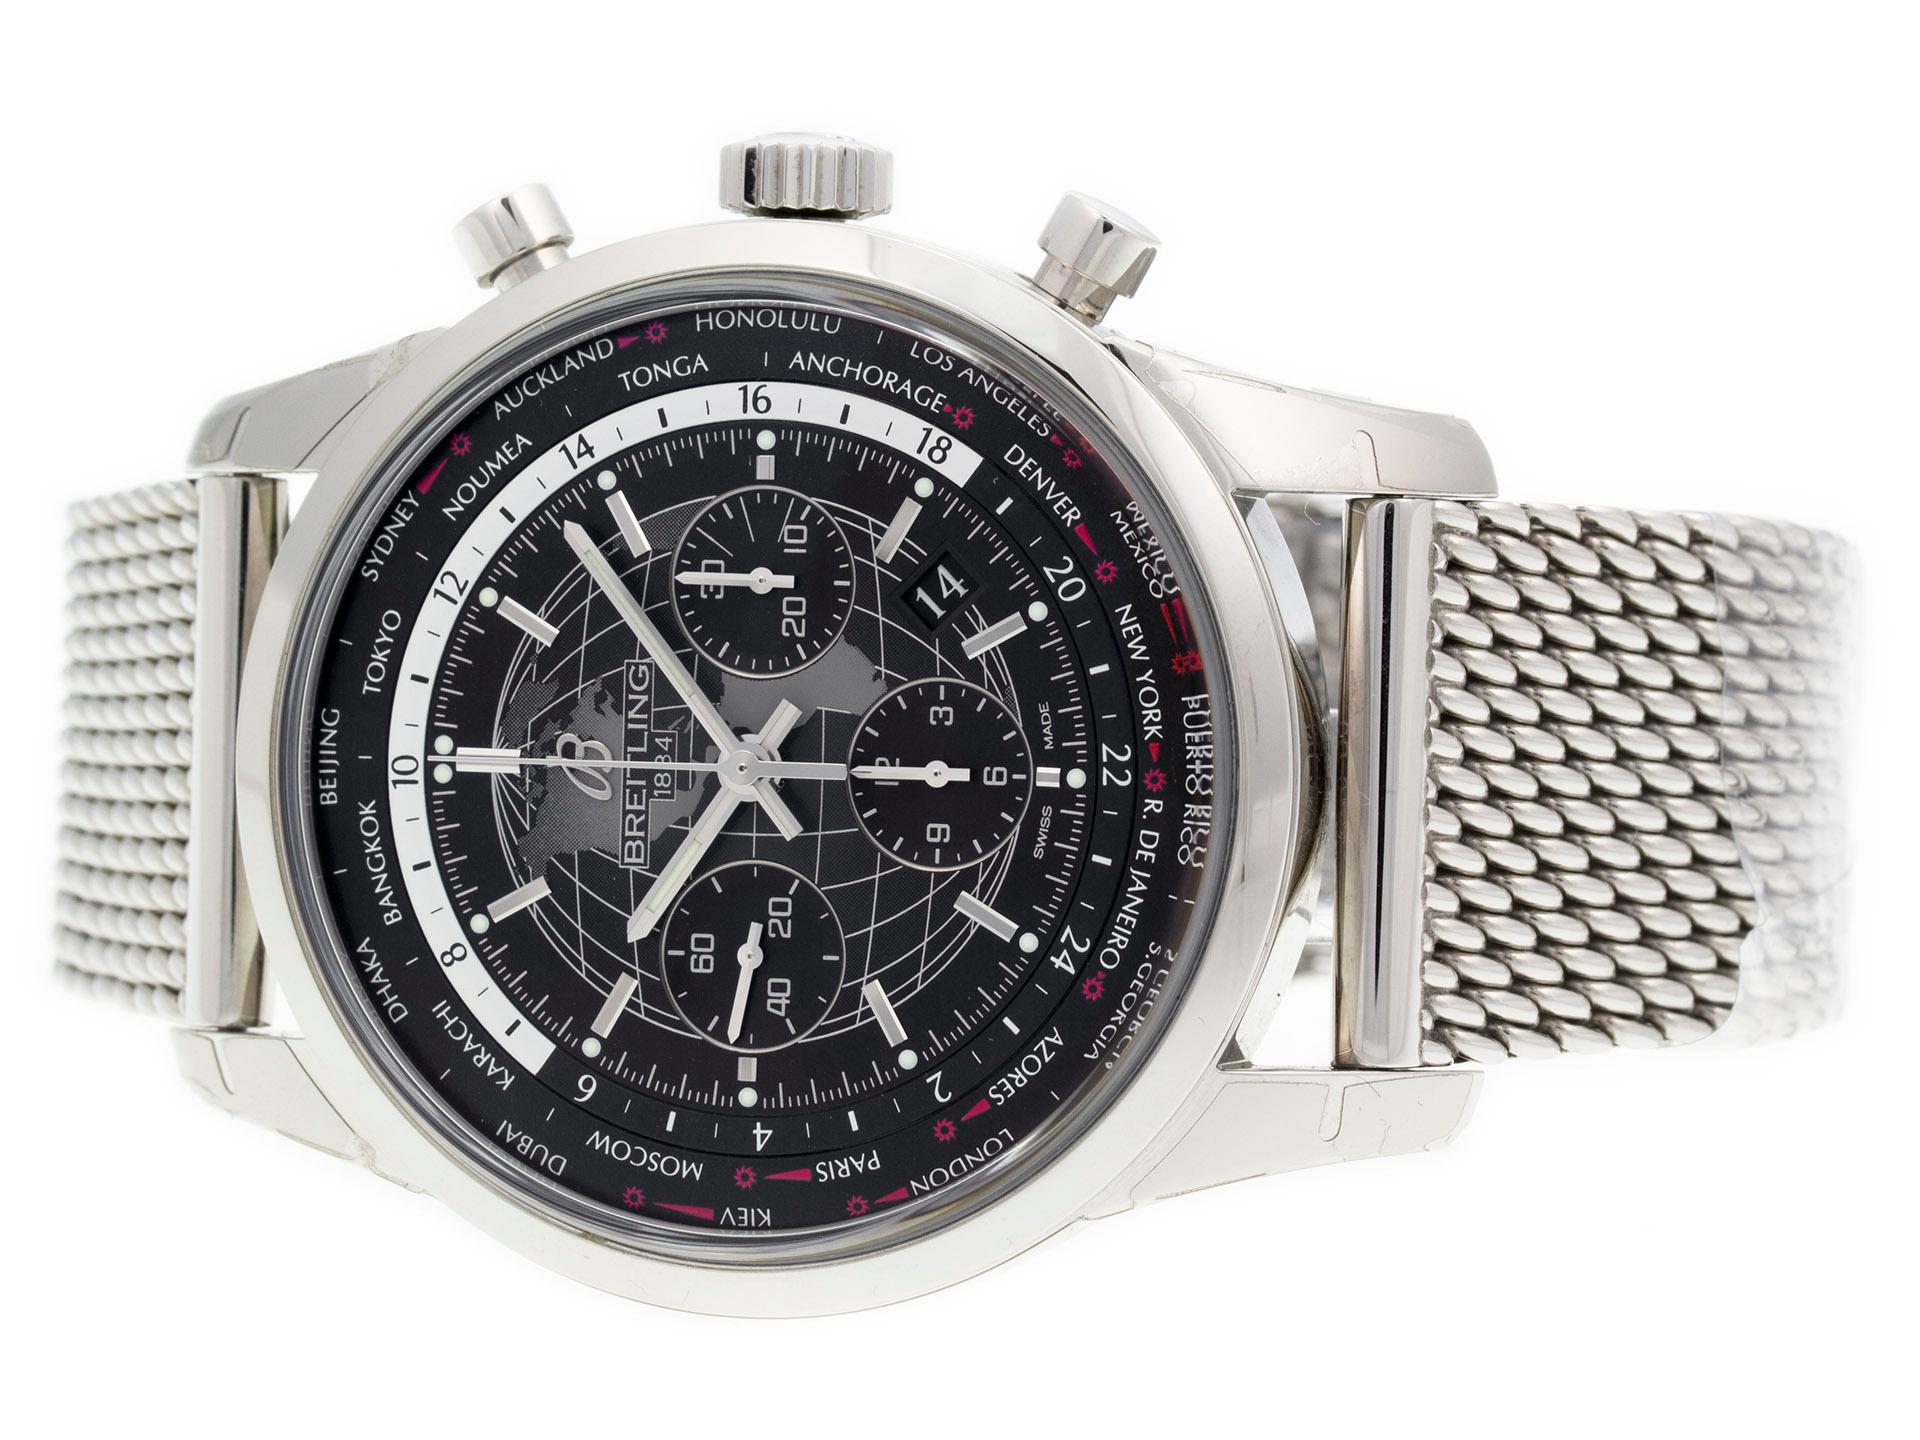 Breitling Transocean Chrono Unitime AB0510U4/BE84-152A im Zustand „Gut“ im Angebot in Willow Grove, PA